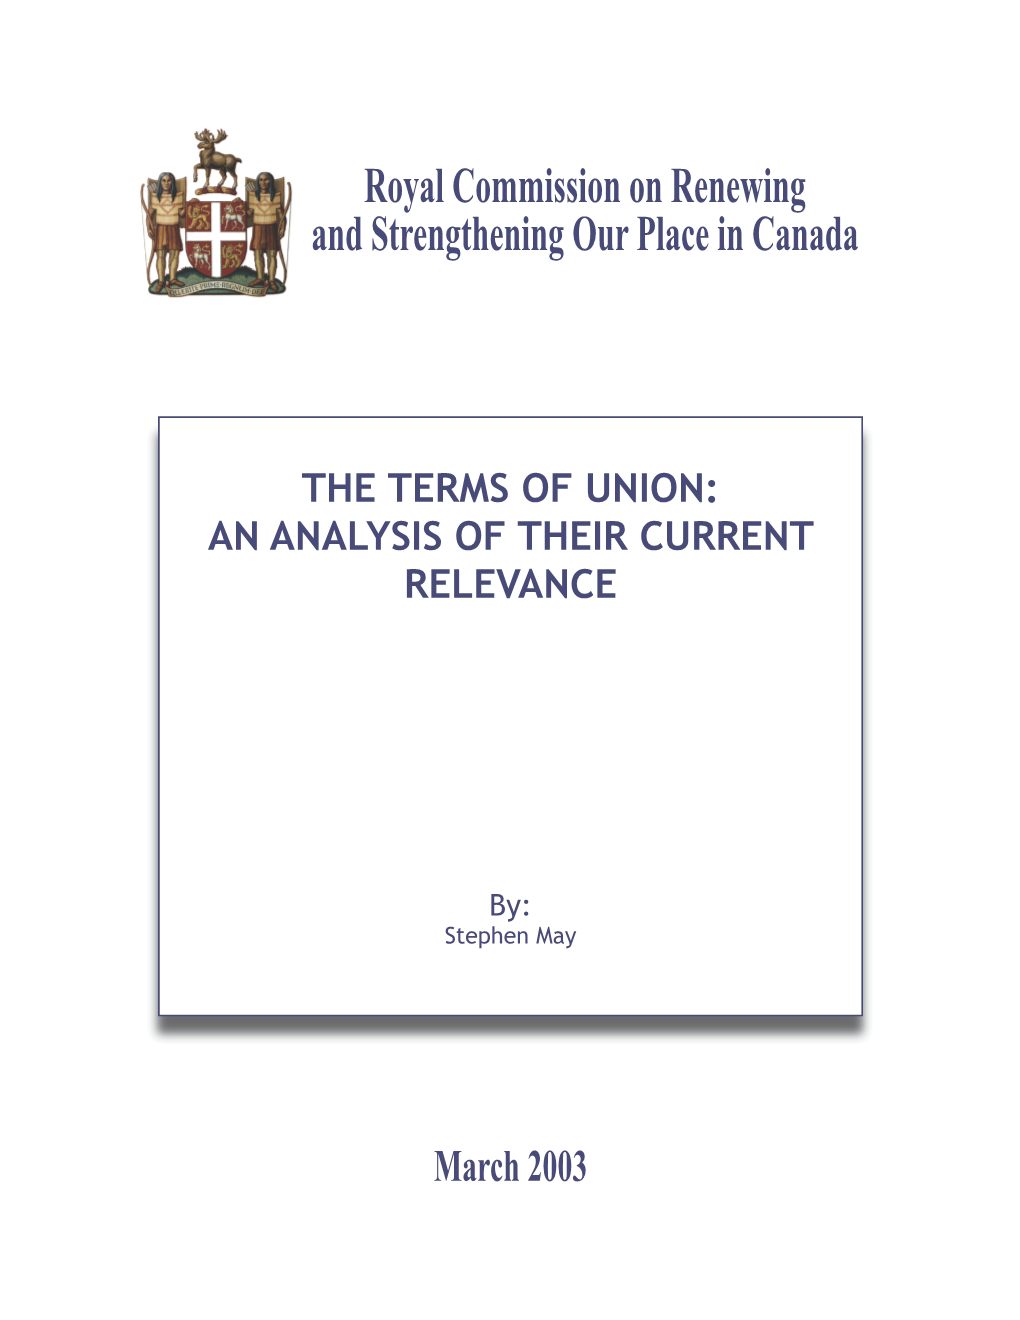 The Terms of Union: an Analysis of Their Current Relevance